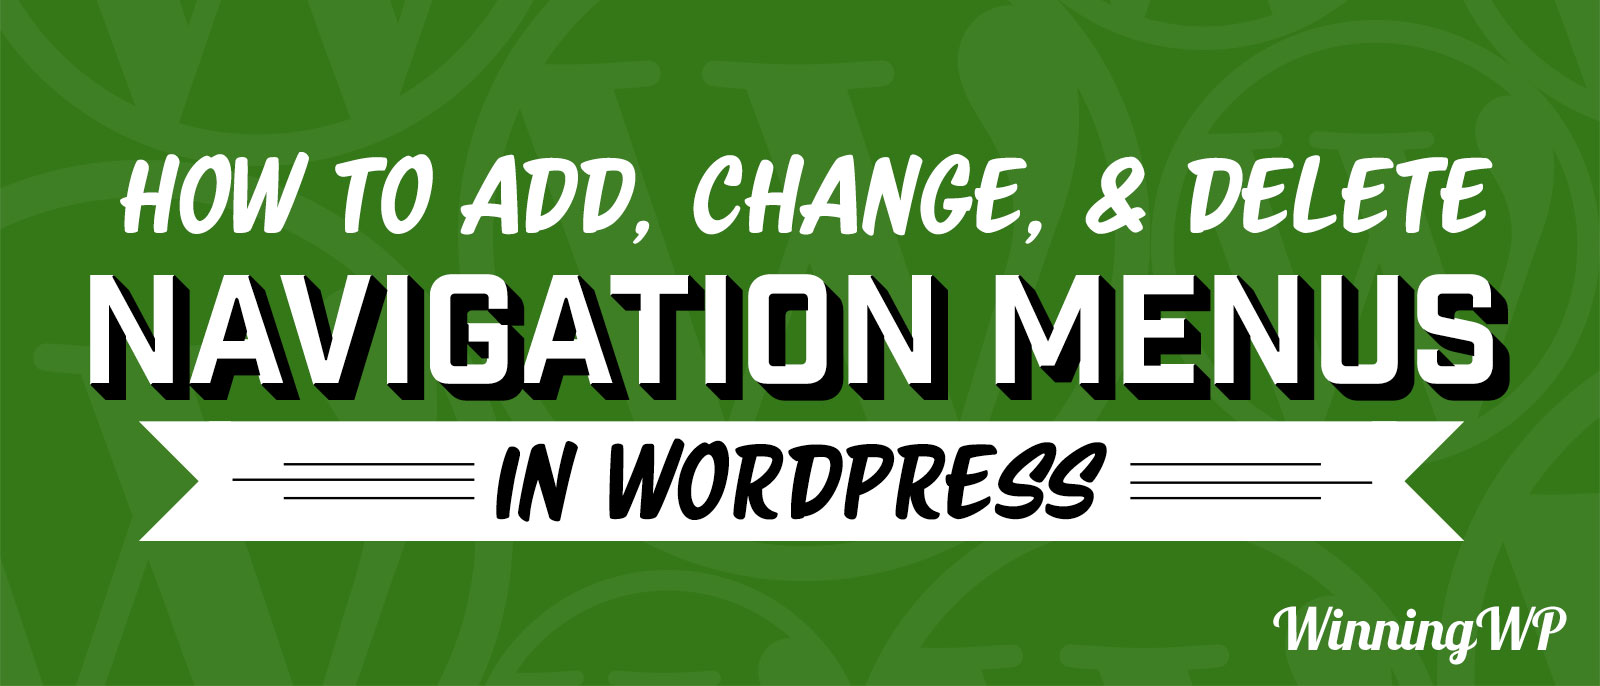 How to add and change navigation menus in WordPress